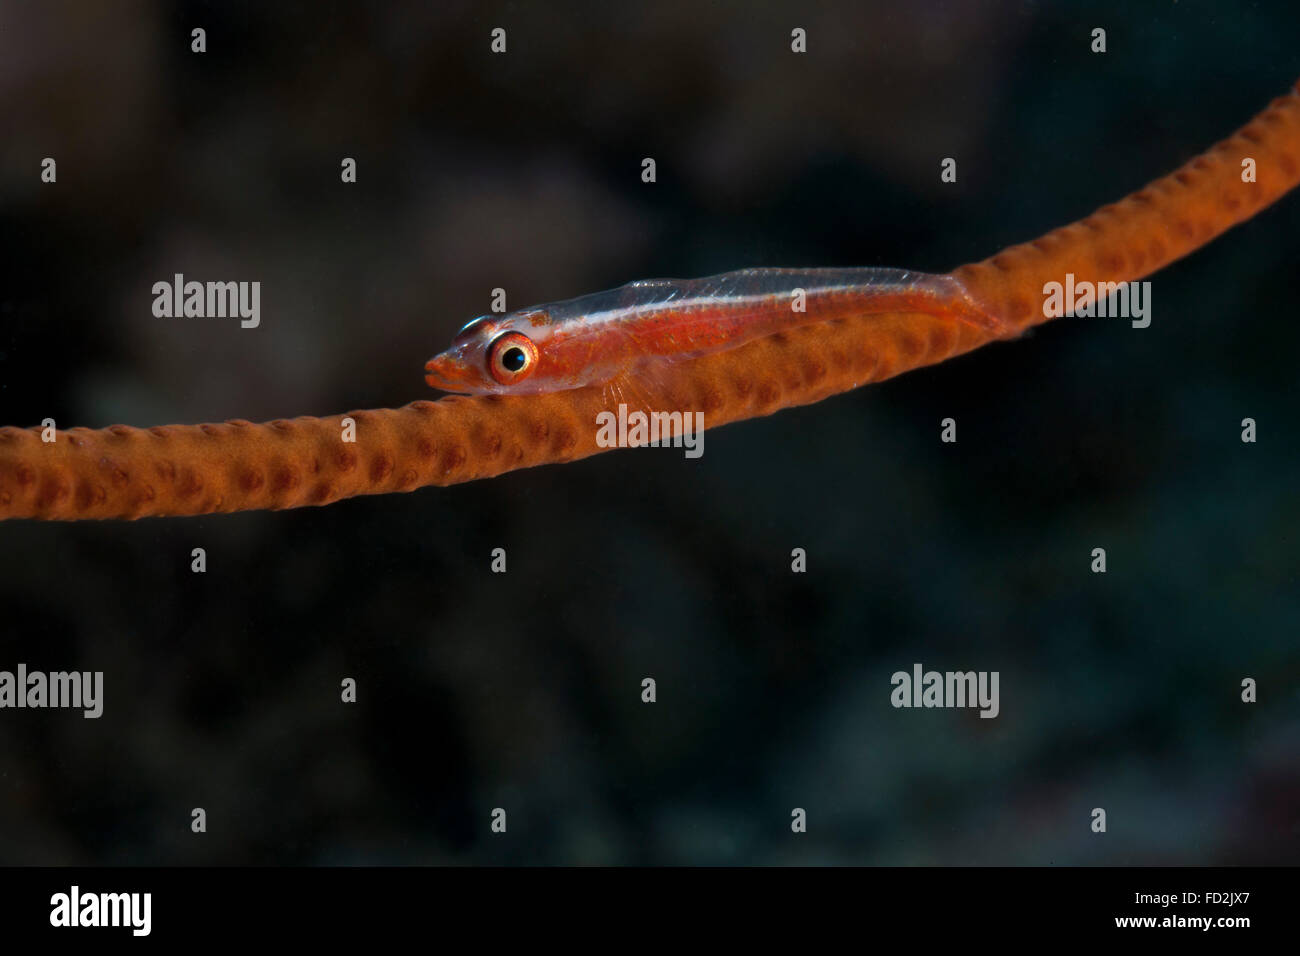 Whip coral goby, Fiji. Stock Photo